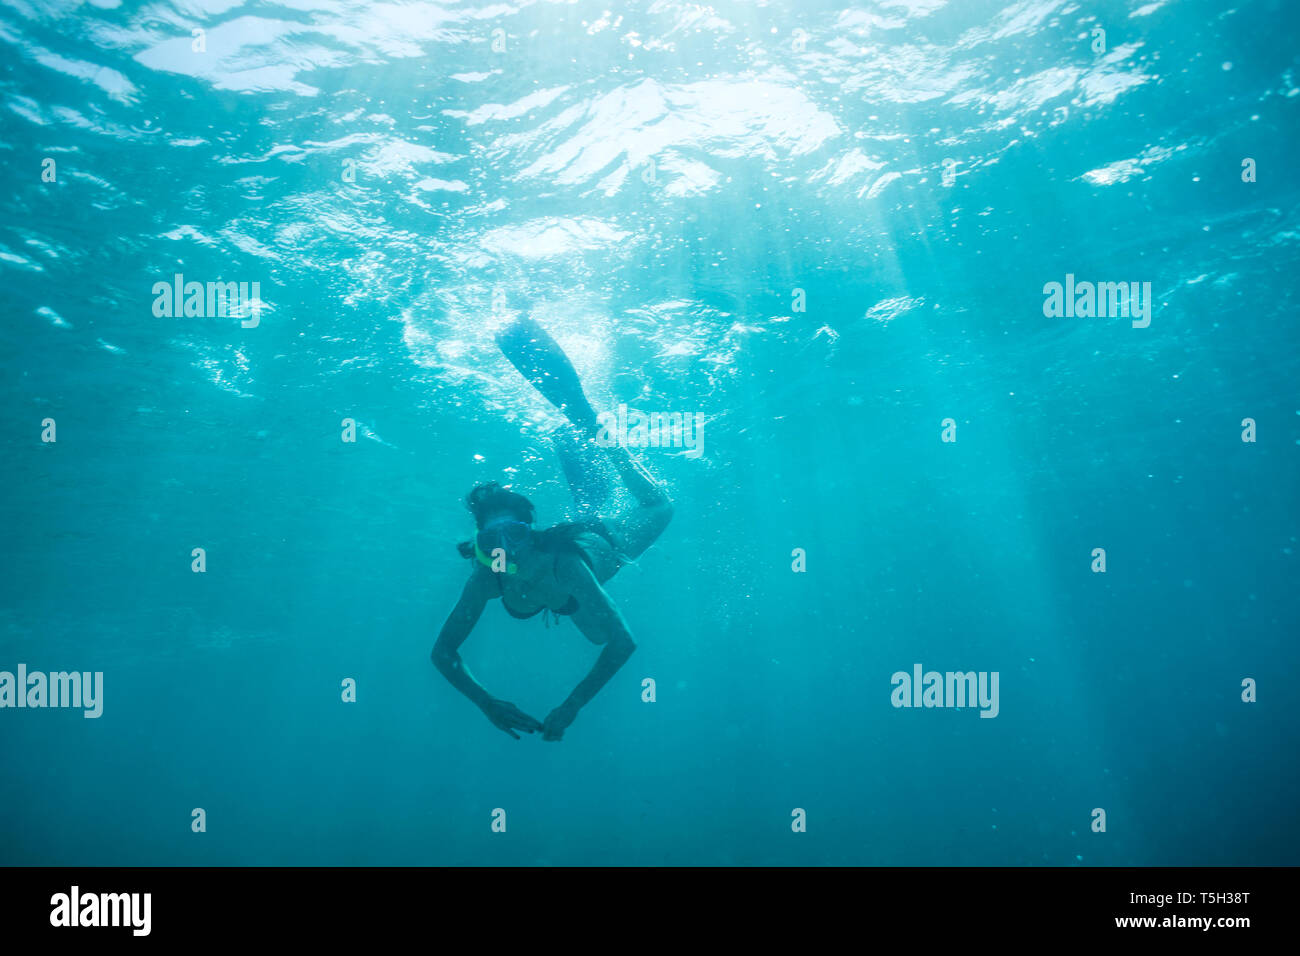 Woman with fins and snorkel diving under water Stock Photo